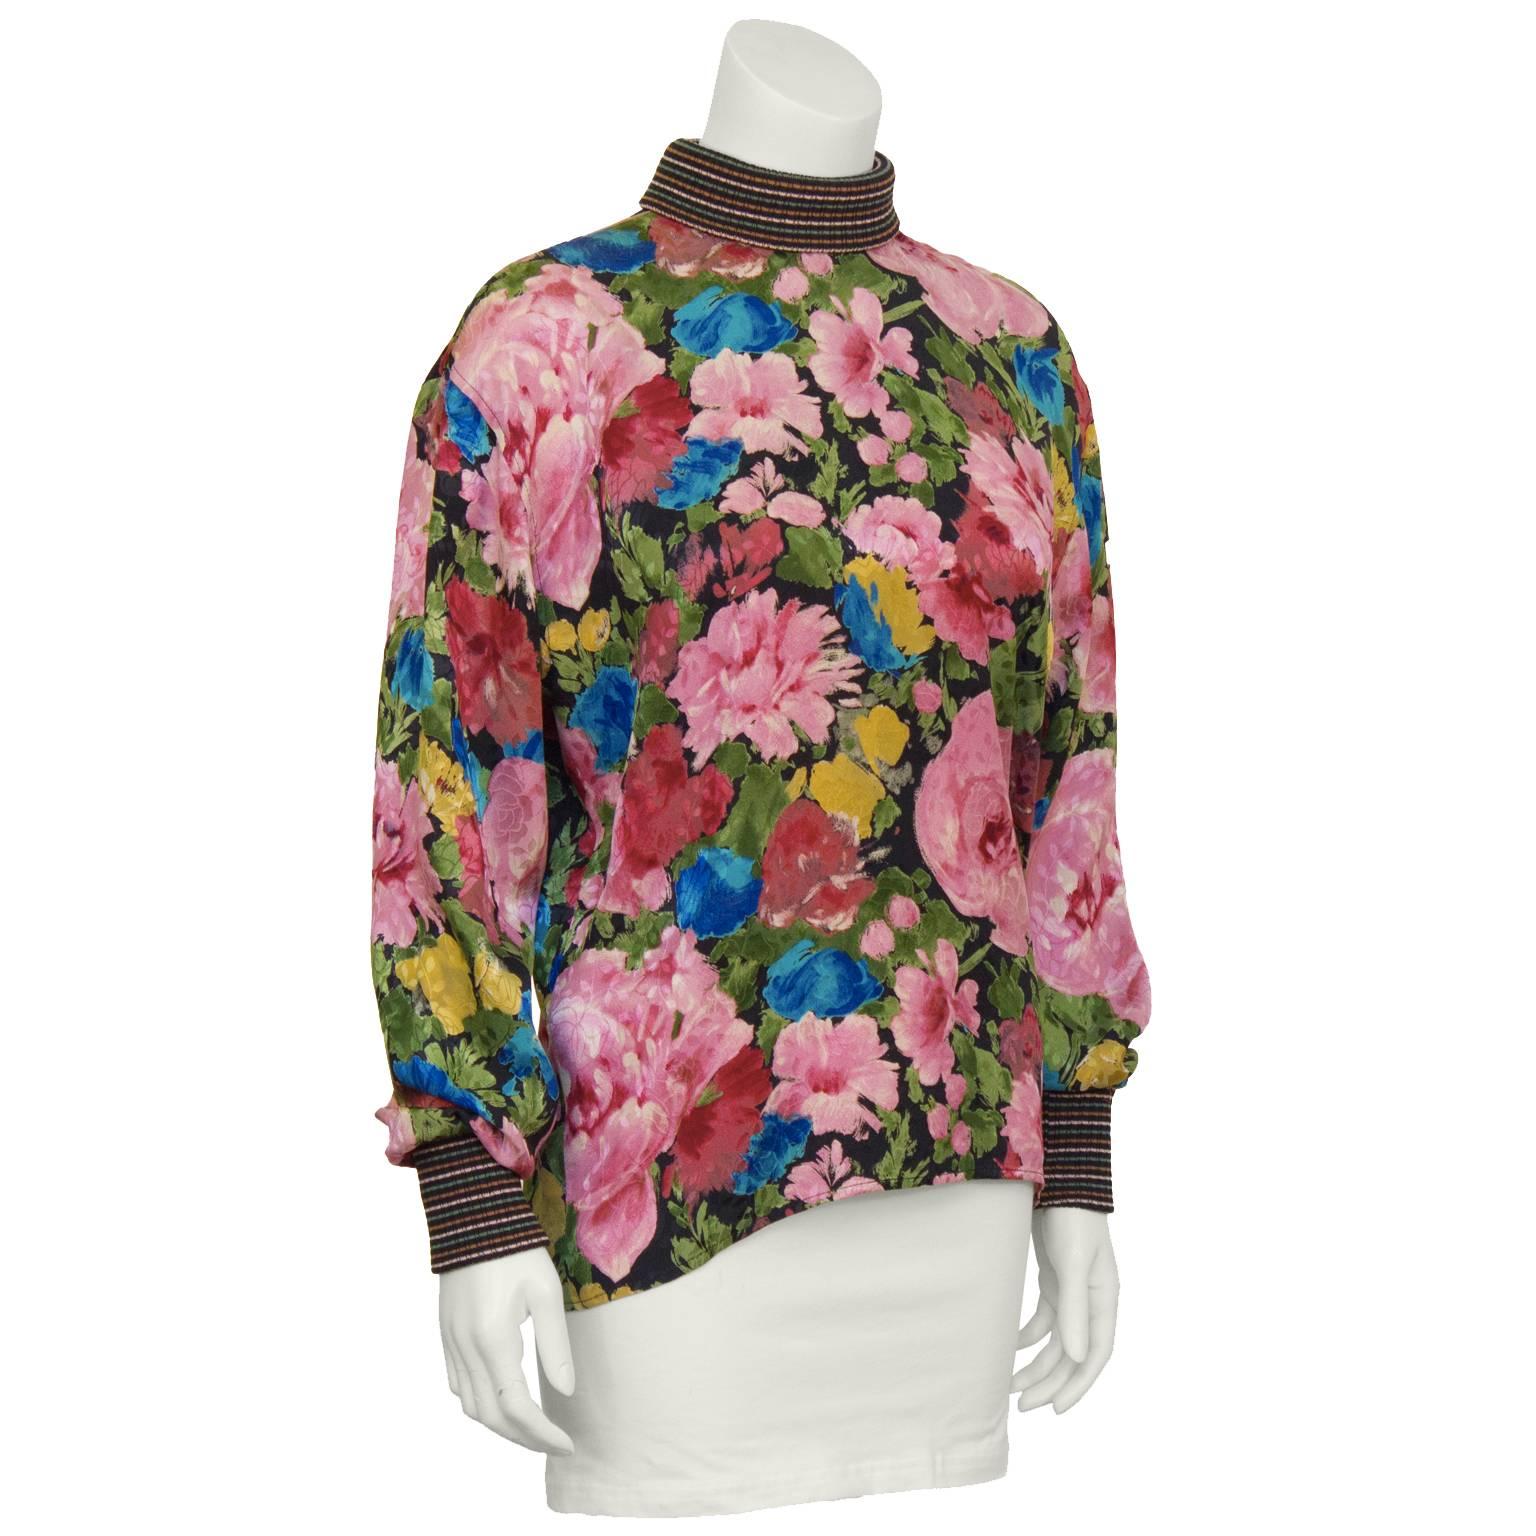 Silk floral printed mock turtleneck blouse by Ungaro from the 1980's. The floral silk-jacquard shirt is finished with striped knit ribbed cuffs and collar. Buttons down the back are marbleized silver. Two buttons on the back are slightly chipped,